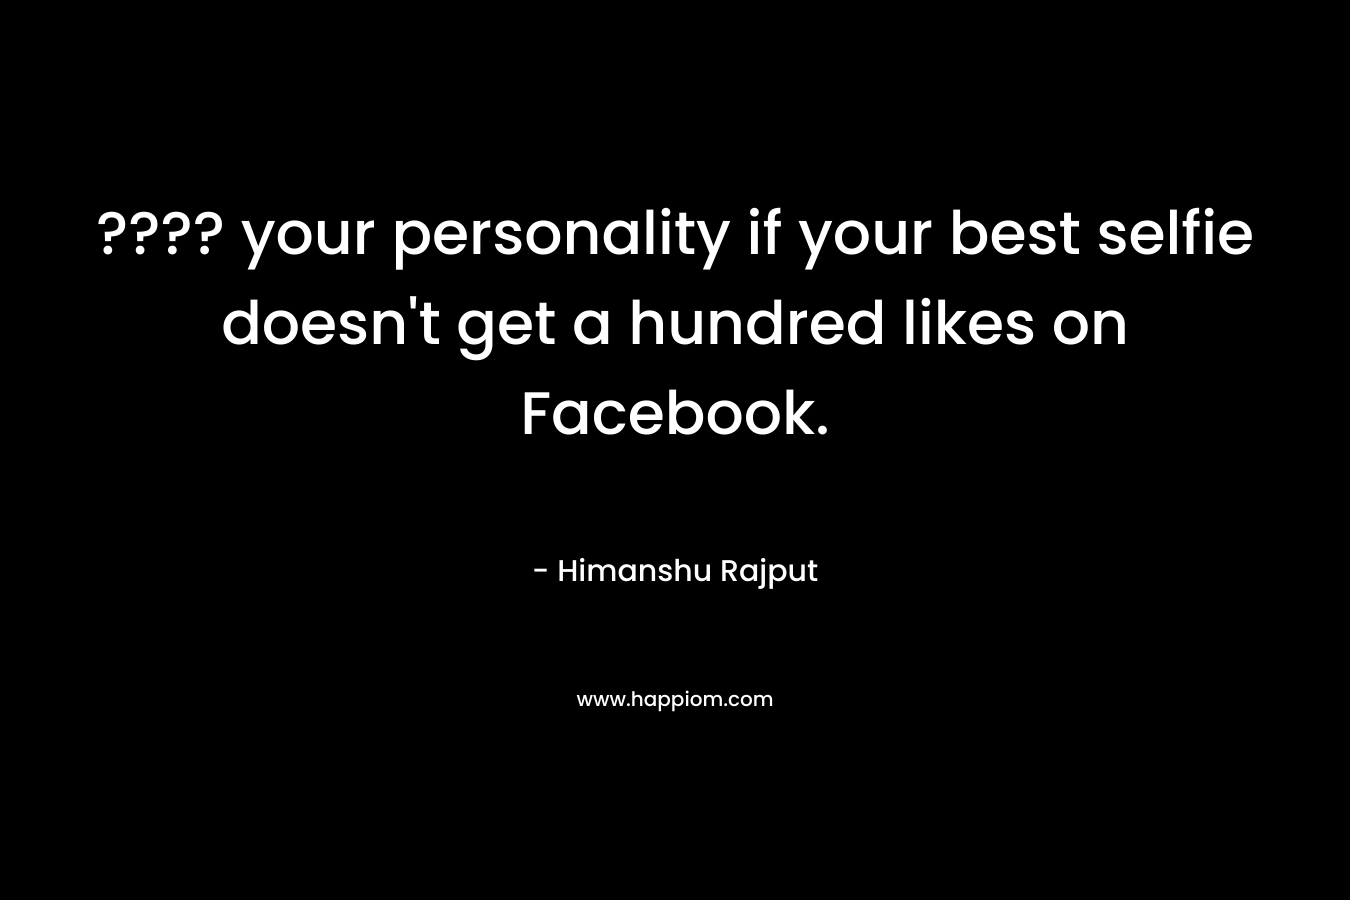 ???? your personality if your best selfie doesn’t get a hundred likes on Facebook. – Himanshu Rajput